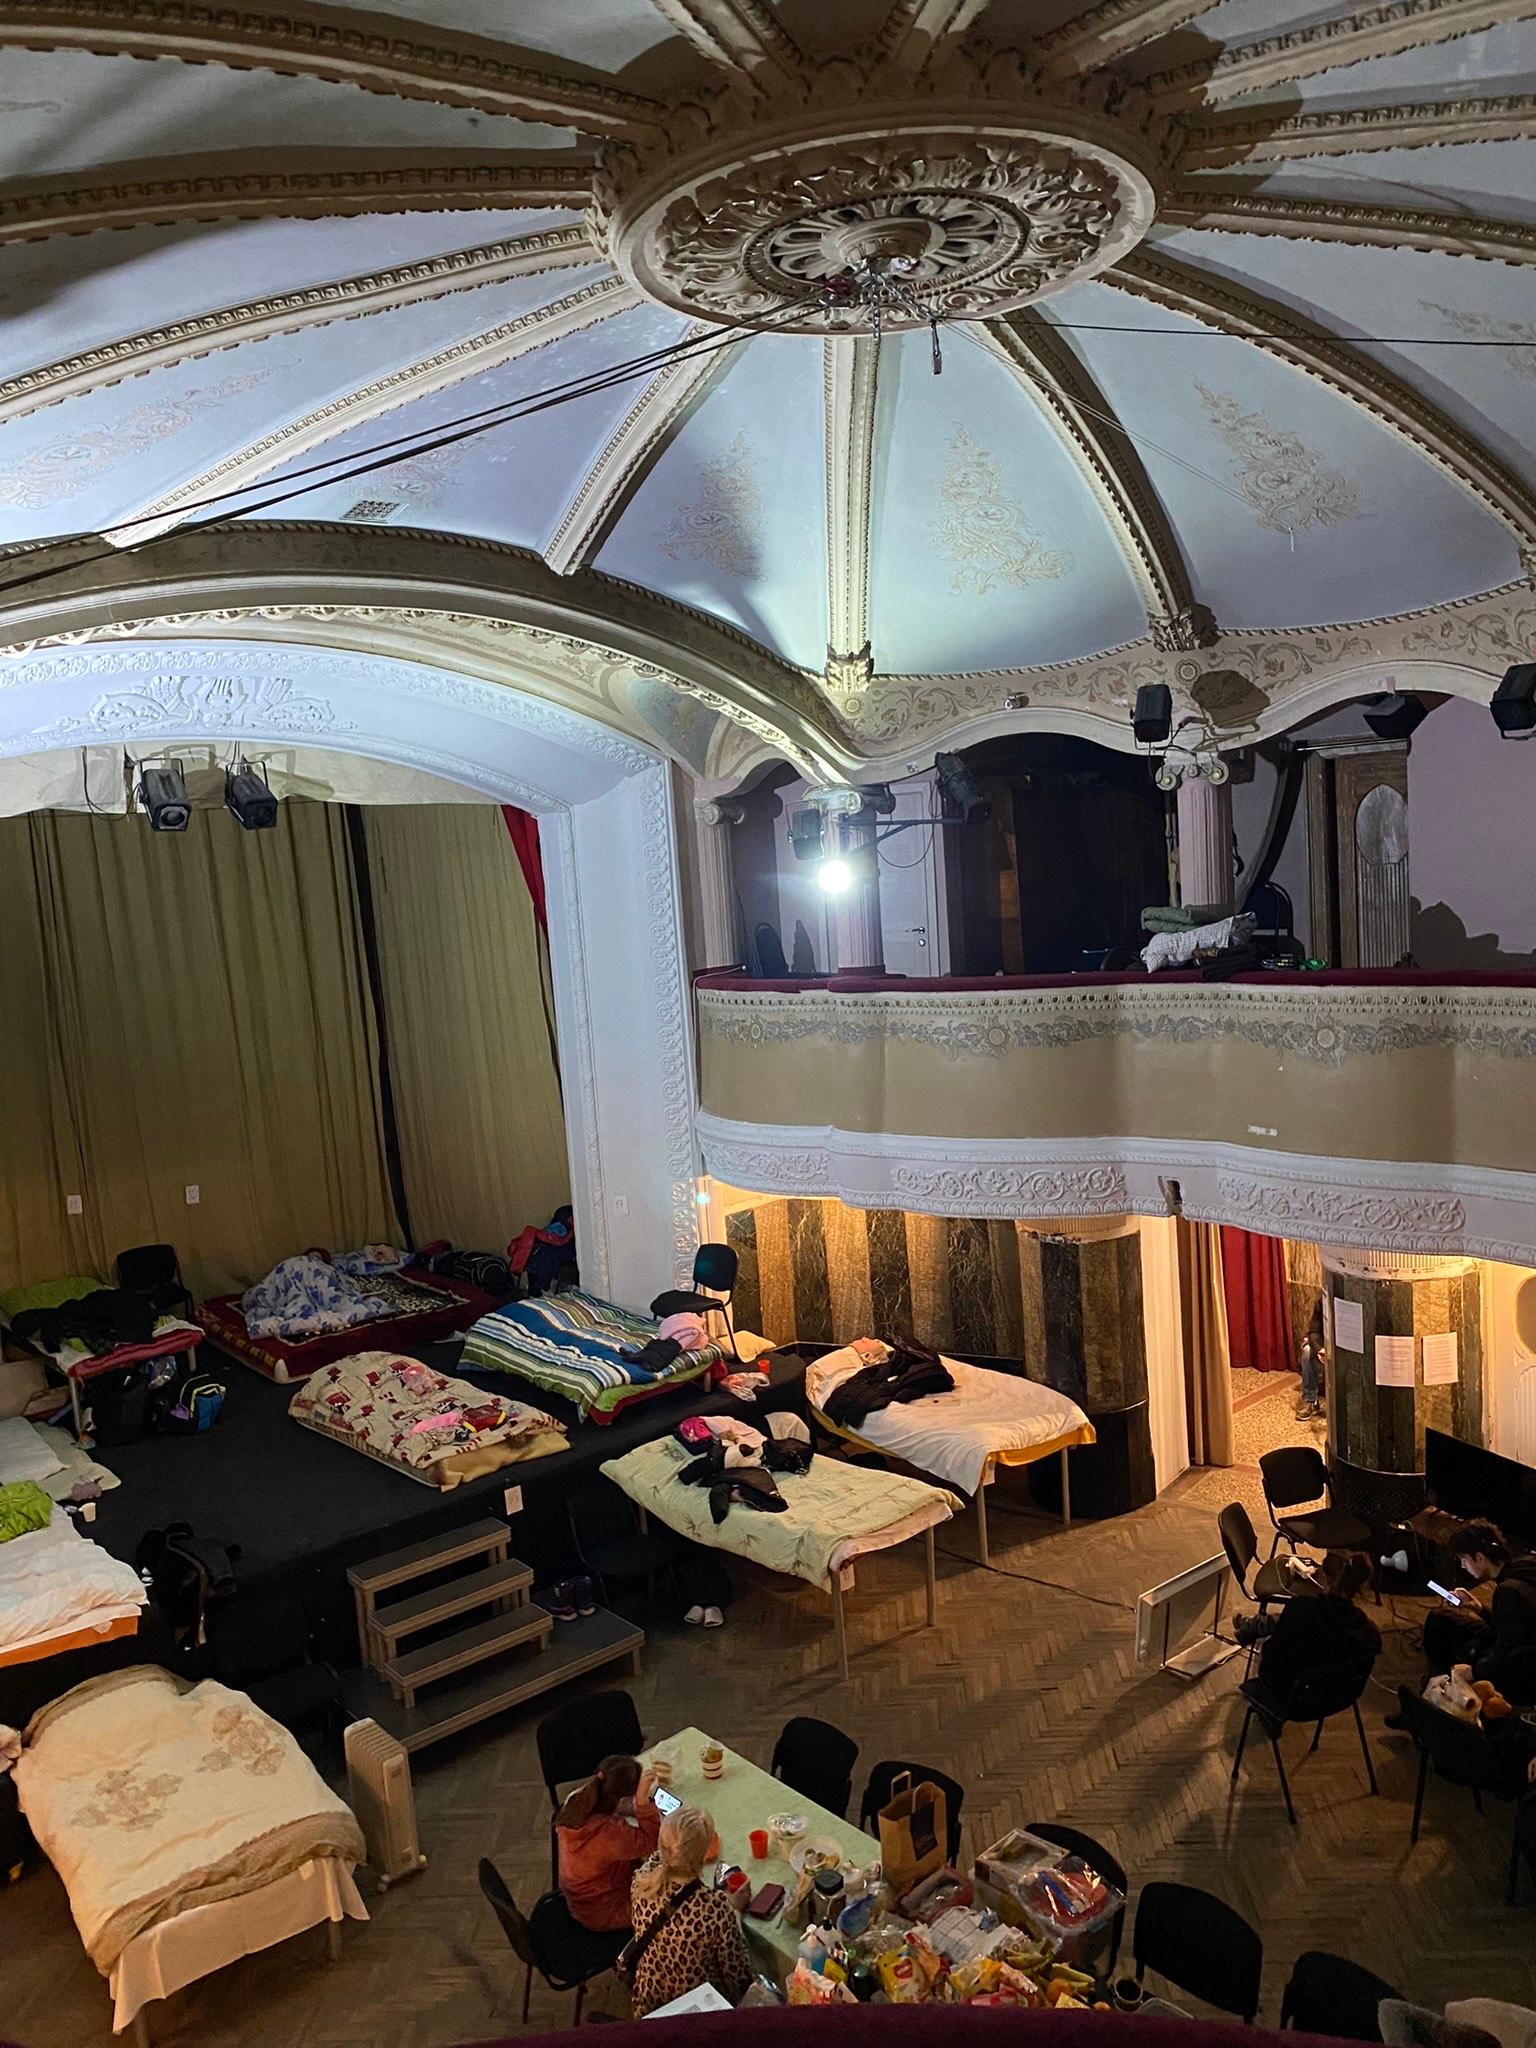 Lviv's Les Kurbas theater has become a shelter for displaced Ukrainians fleeing war